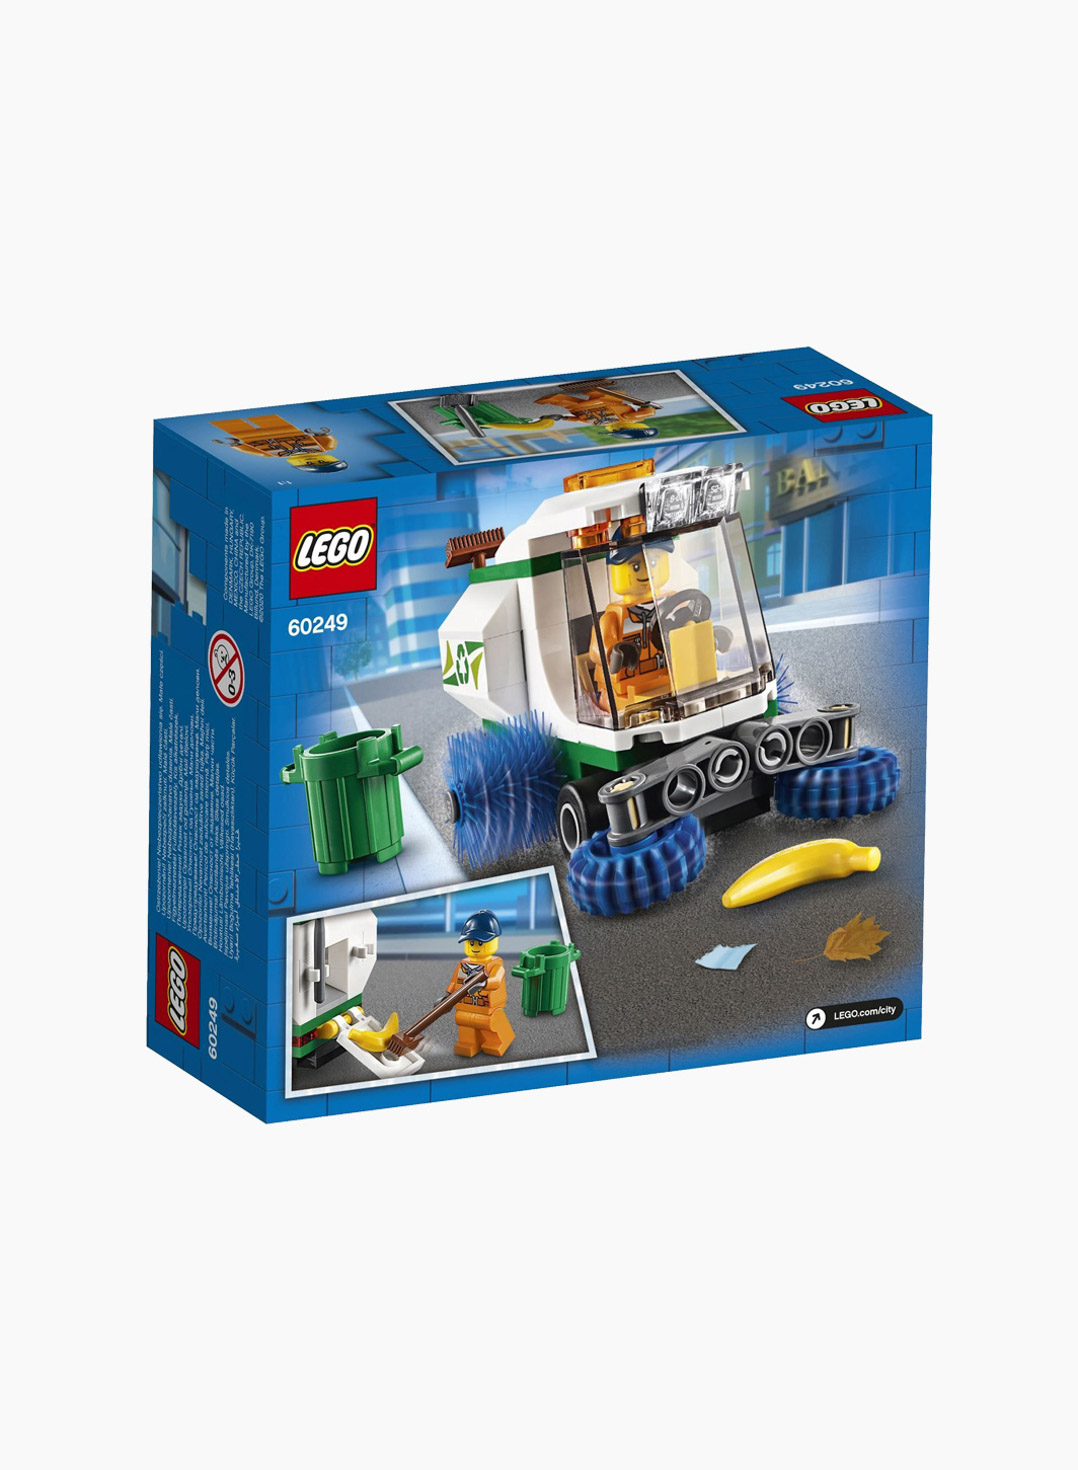 Lego City Constructor Street Sweeper